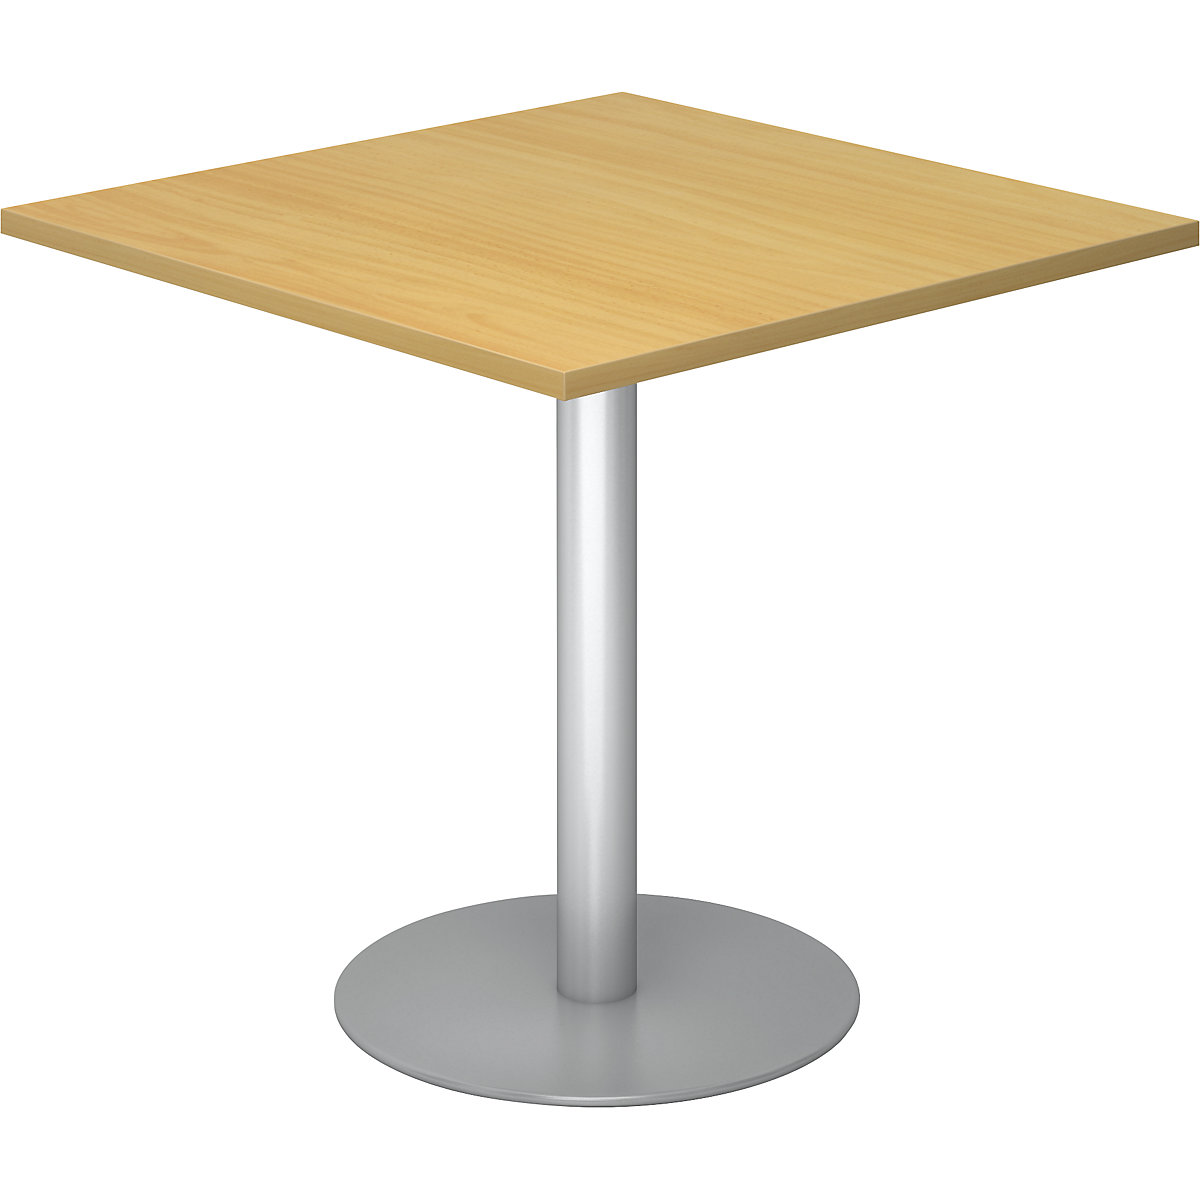 Conference table, LxW 800 x 800 mm, 755 mm high, silver frame, tabletop in beech finish-7